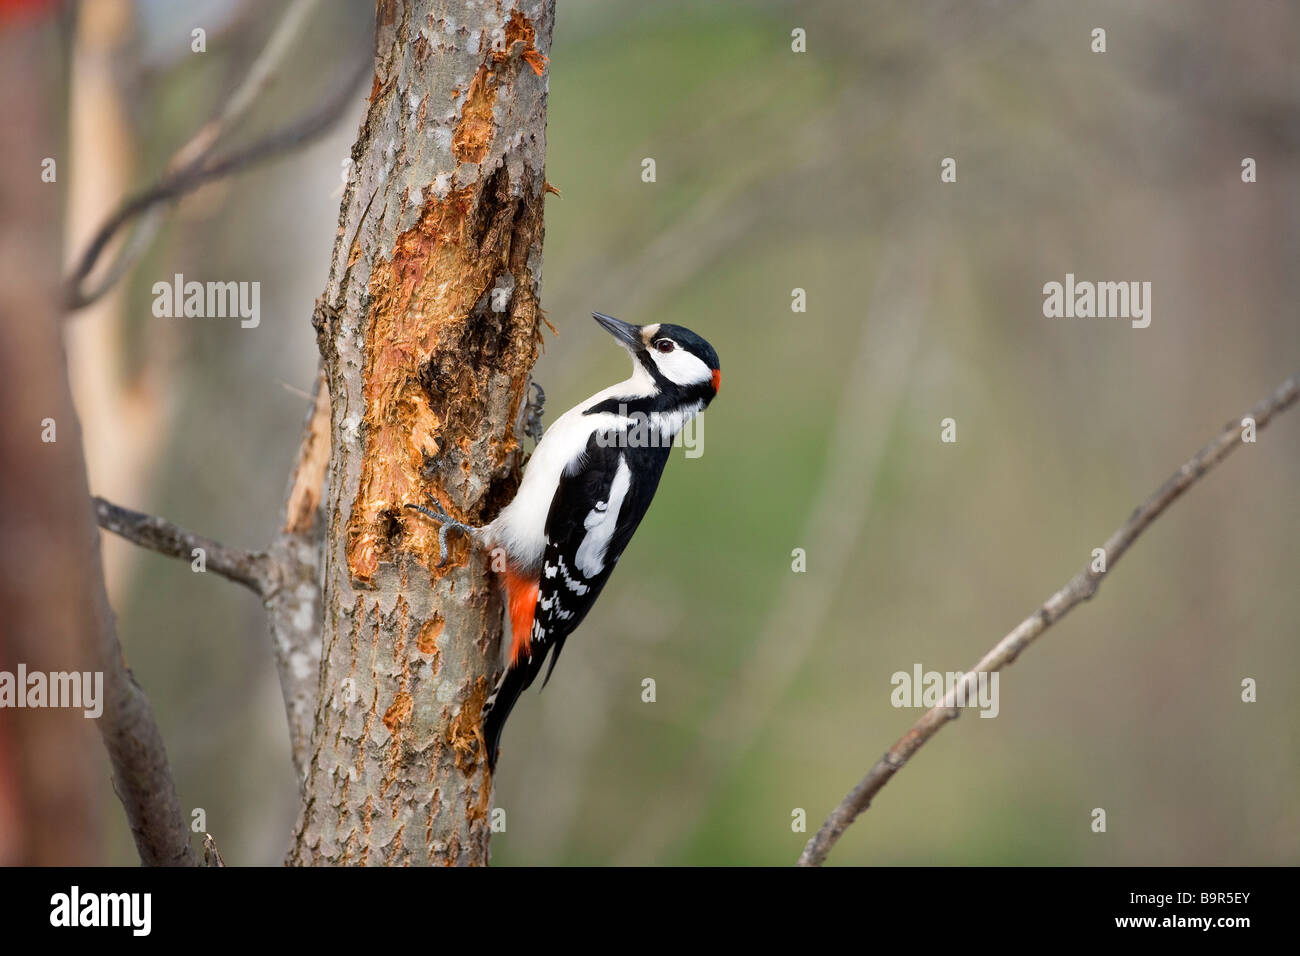 Finland, Carelie, Great Spotted Woodpecker (Dendrocopos major) Stock Photo